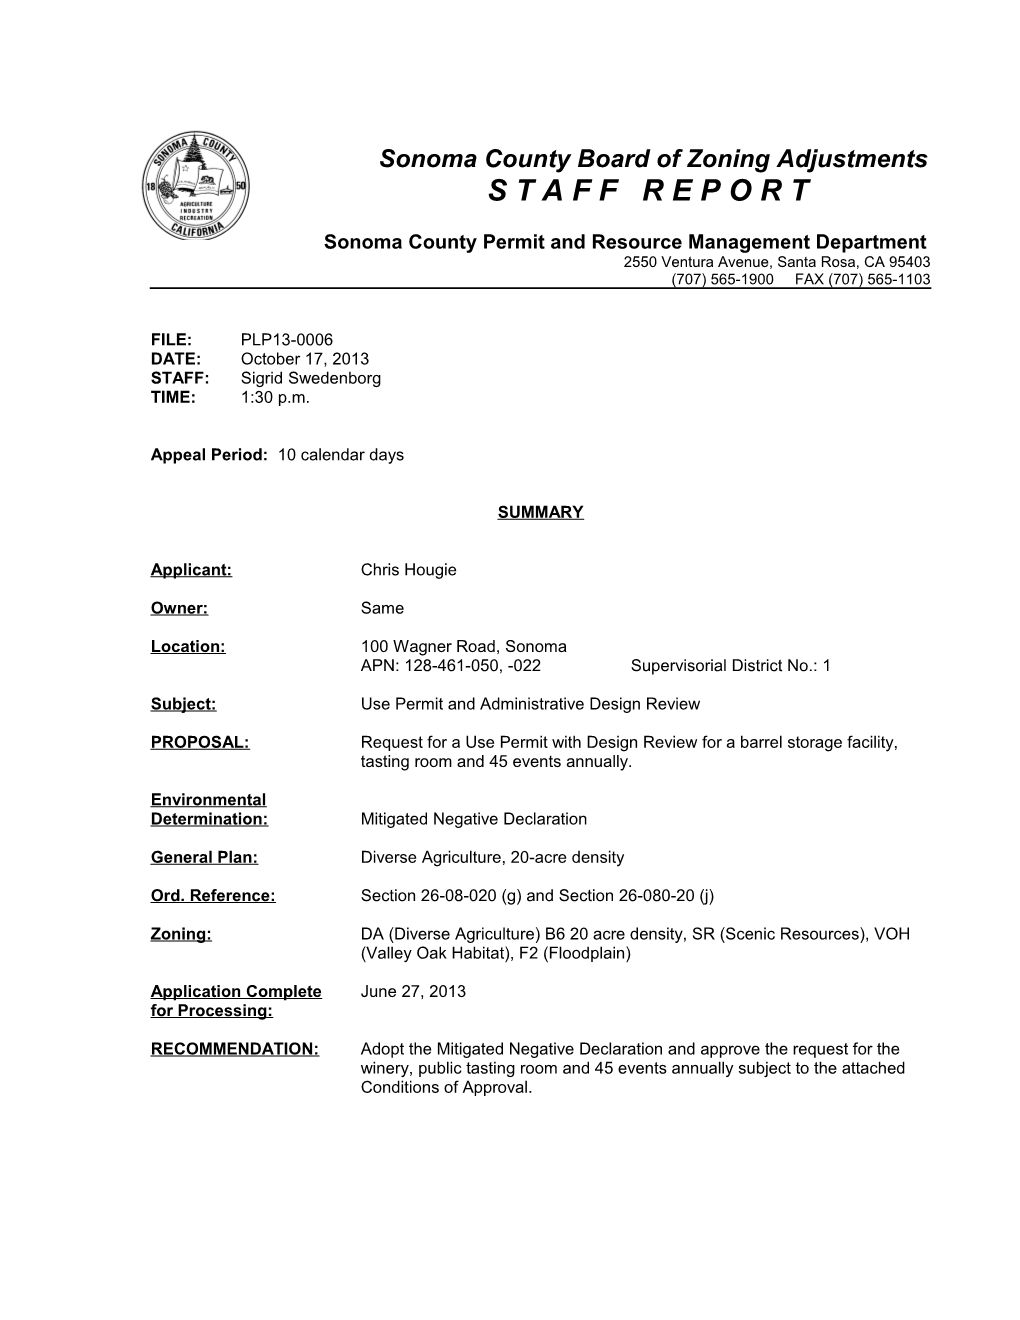 Sonoma County Board of Zoning Adjustments S T a F F R E P O R T